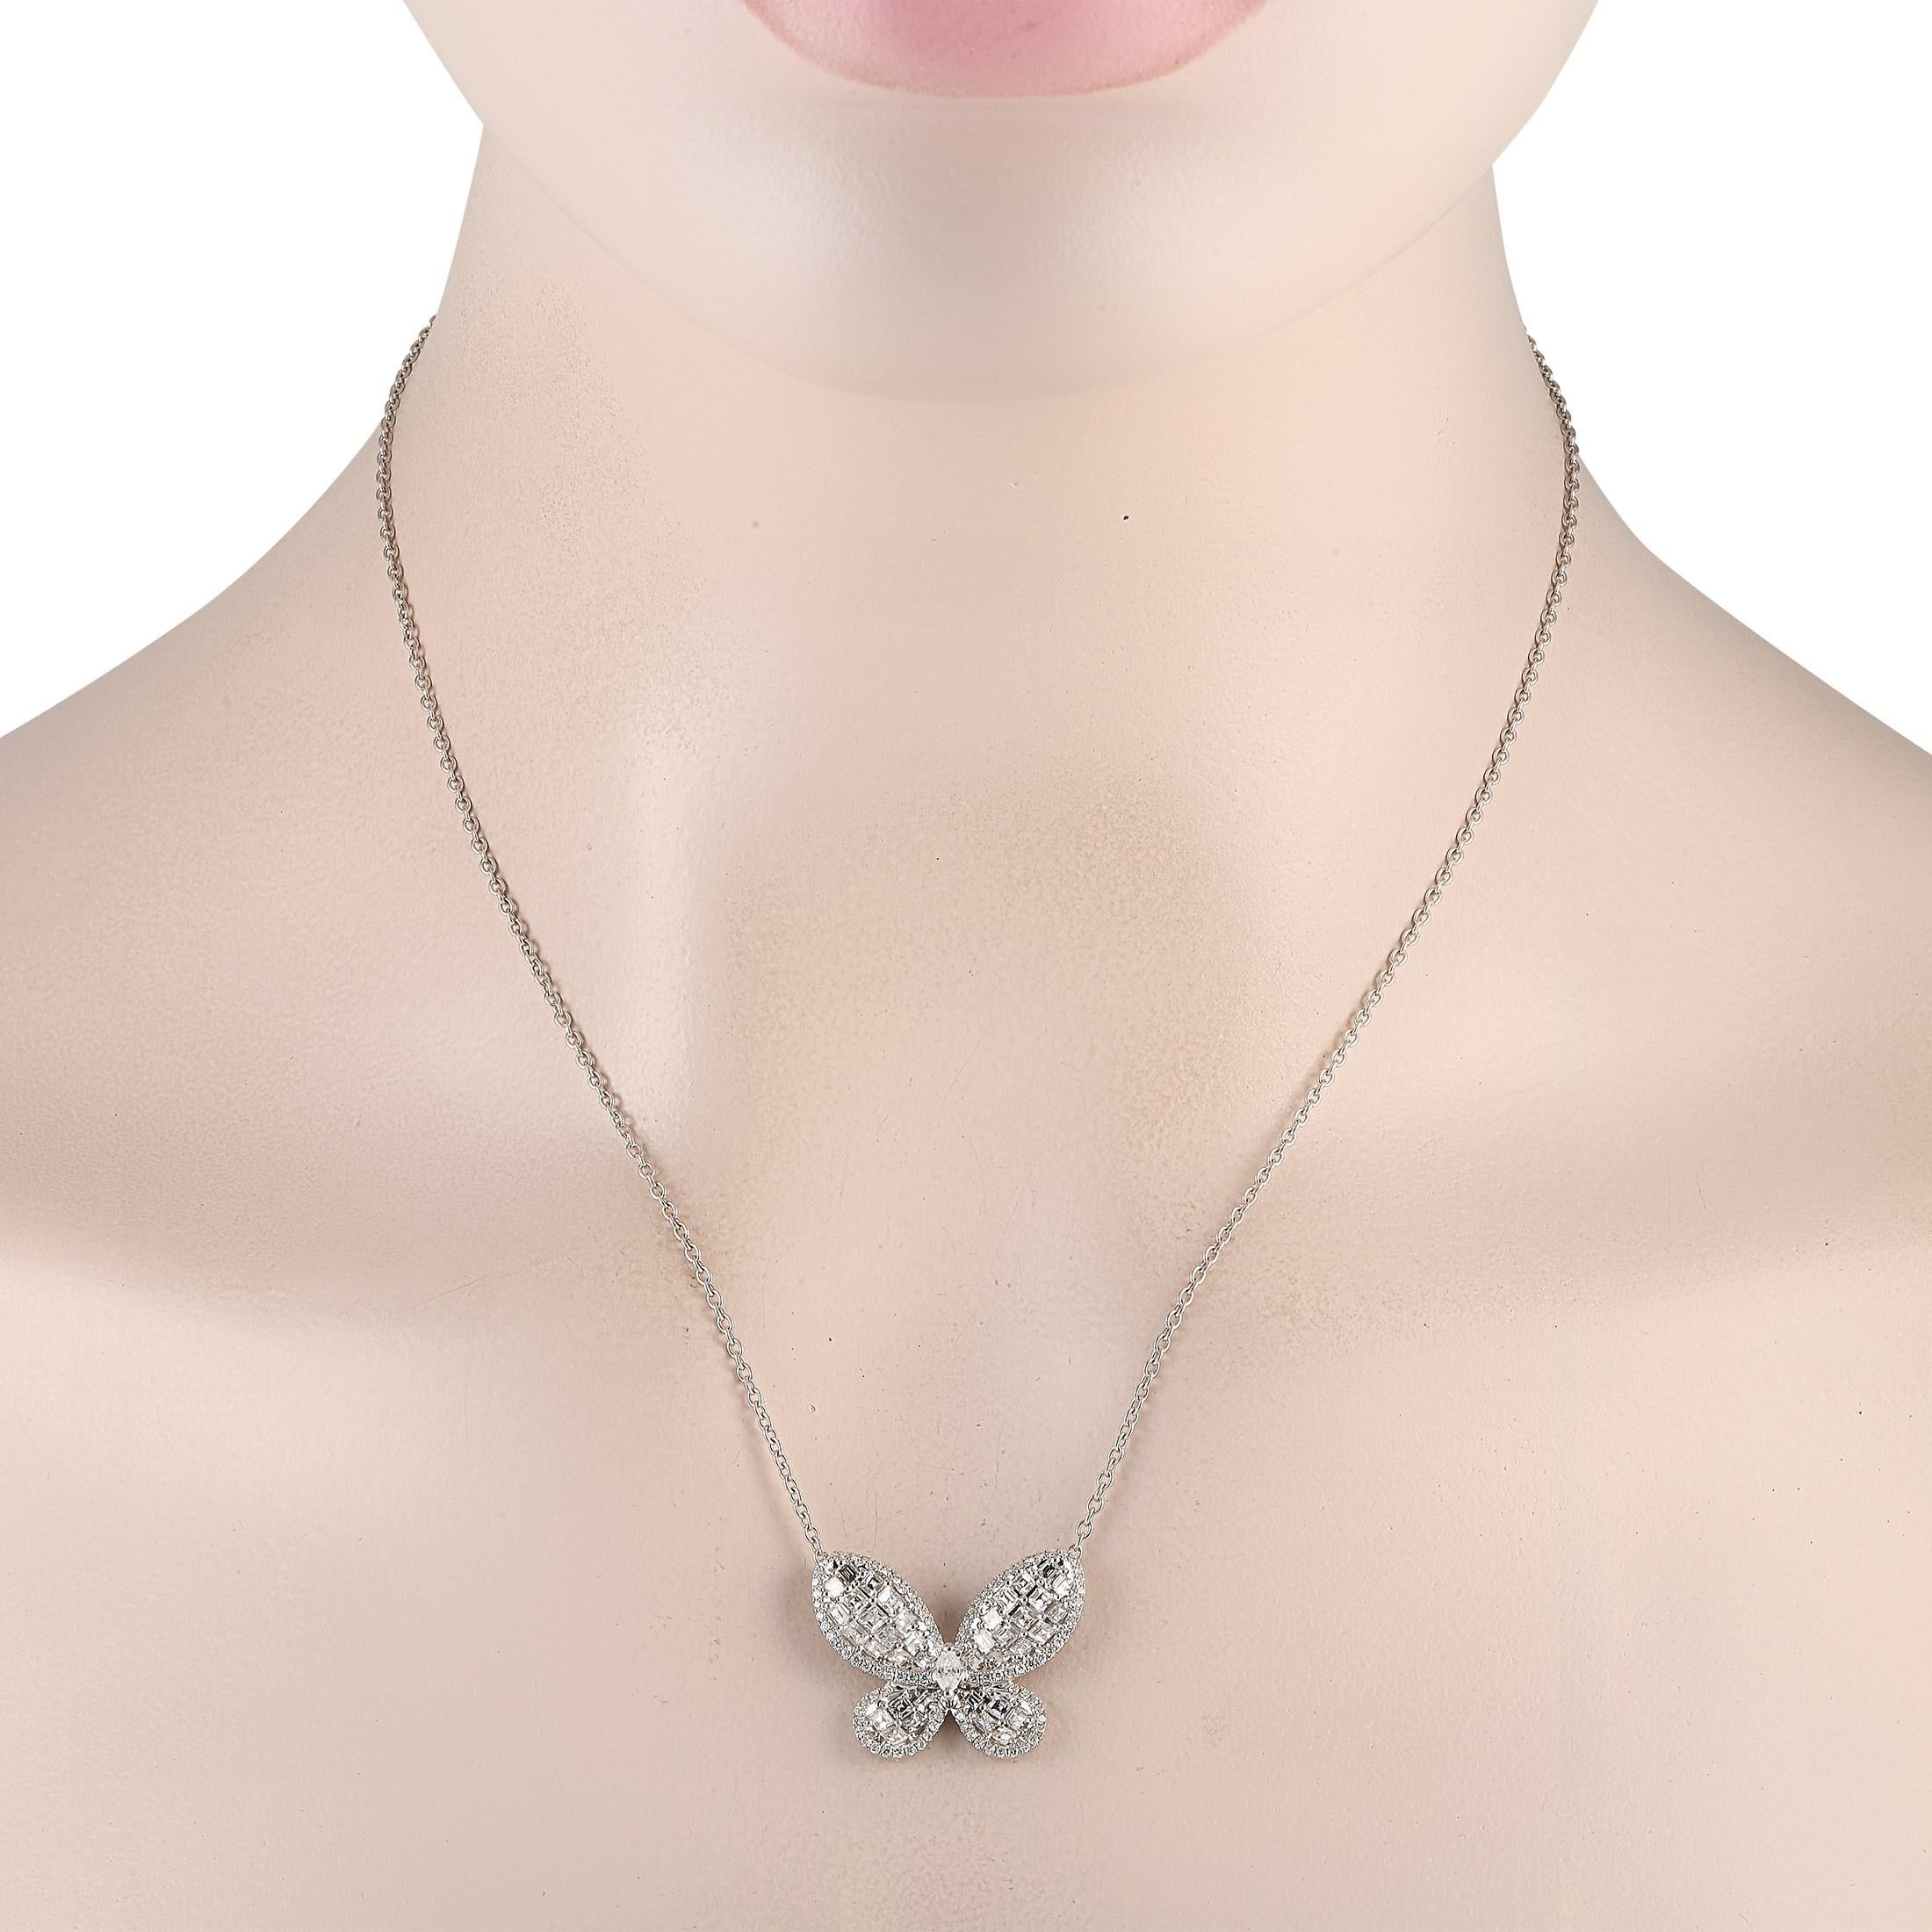 Bearing a symbol of transformation, this white gold necklace with a diamond-encrusted butterfly pendant delivers a meaningful style statement. You'll love the way the round and square-cut diamonds reflect light, sparking some joy and enthusiasm into